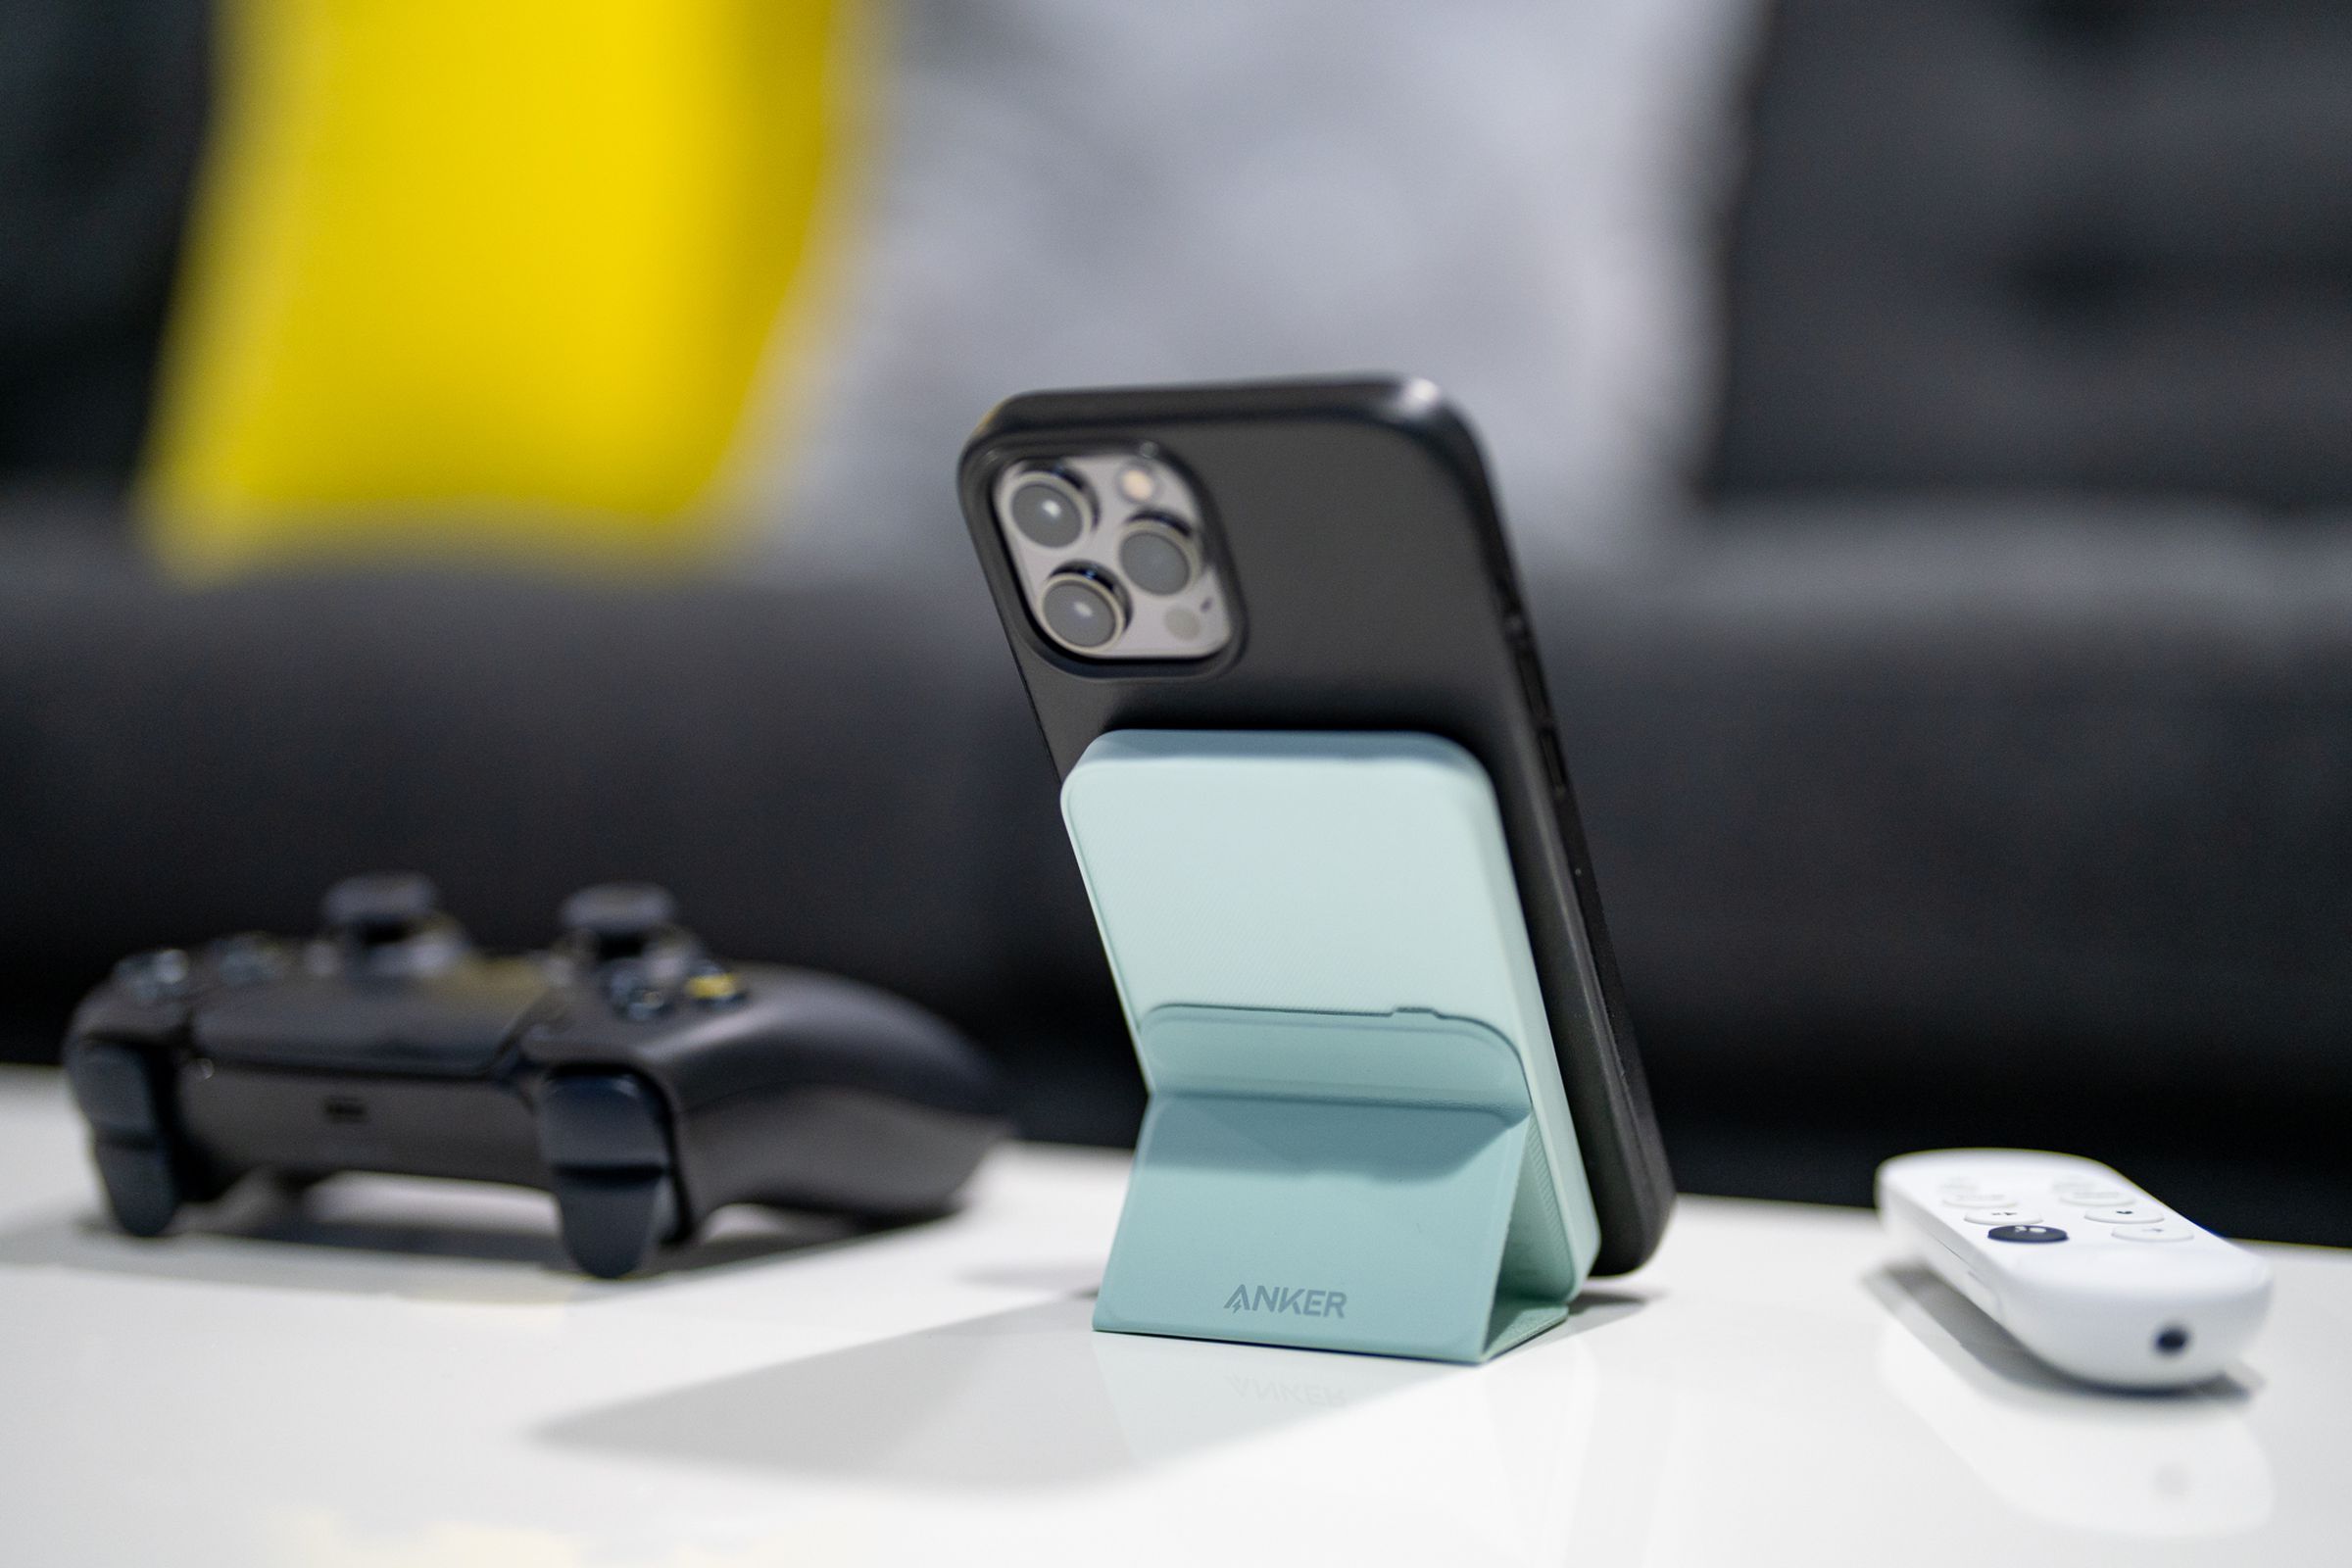 Anker’s 622 Magnetic Battery (MagGo) holding up an iPhone with its kickstand on a desk.